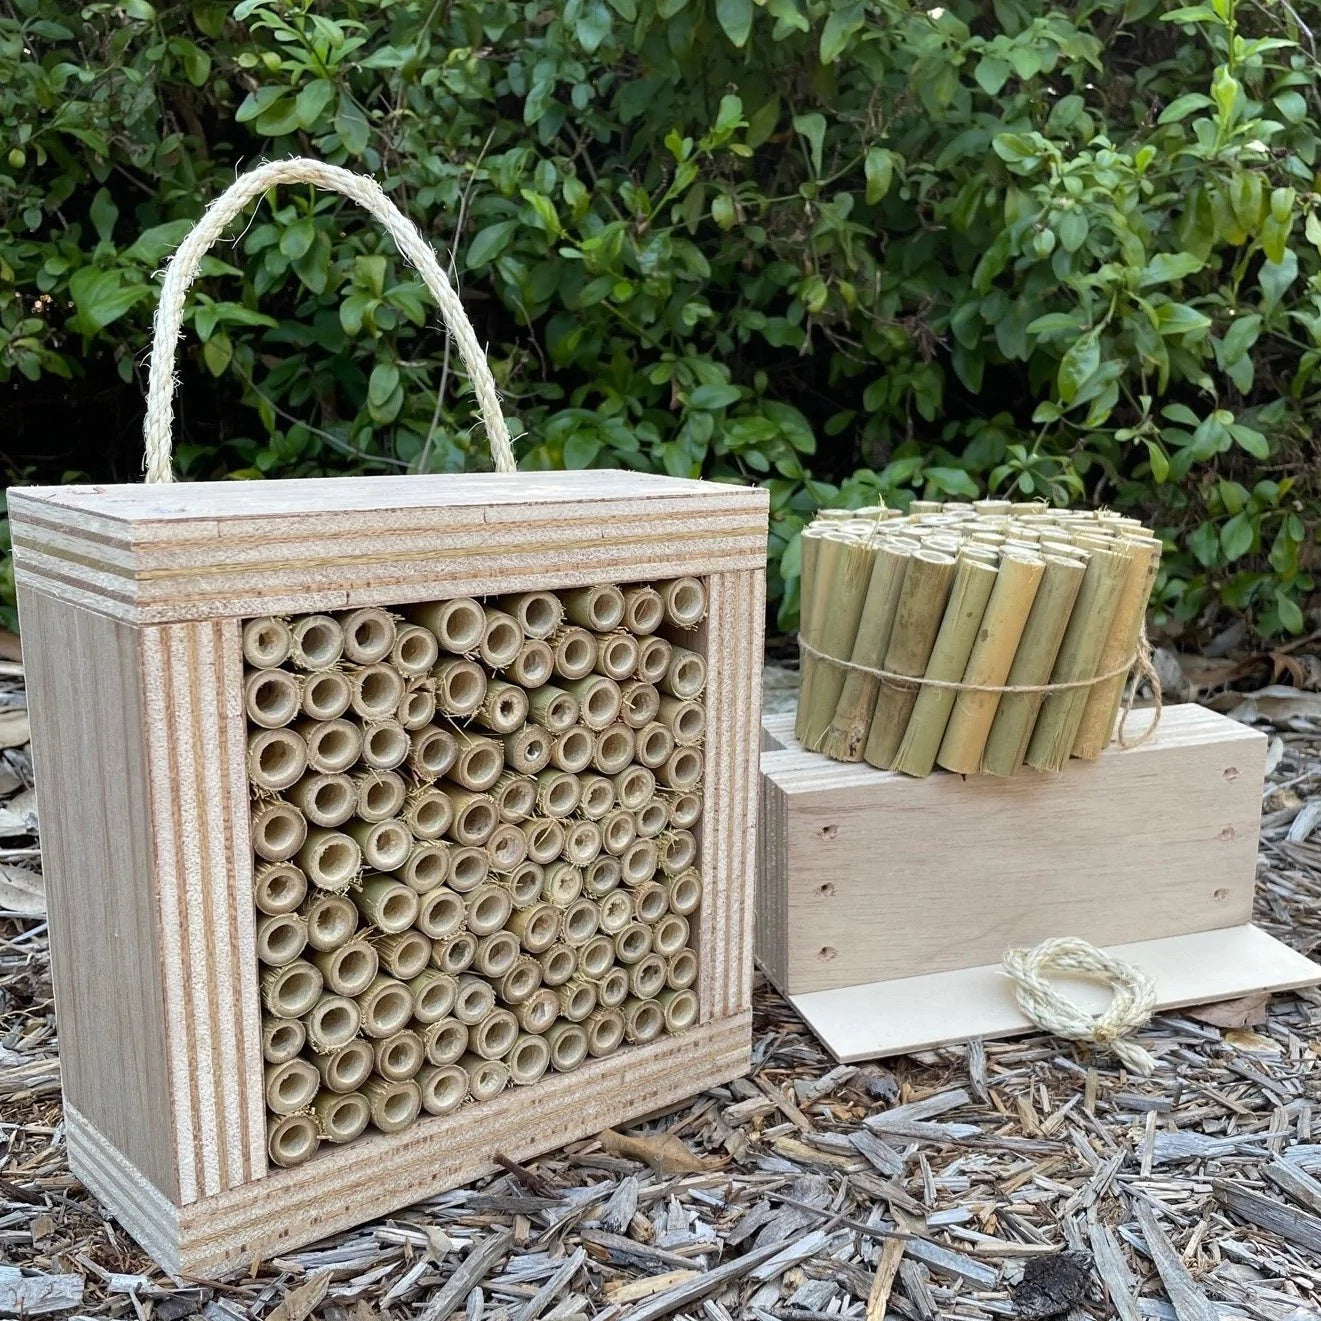 https://banish.com.au/collections/man/products/diy-kit-bee-ladybird-and-insect-hotel